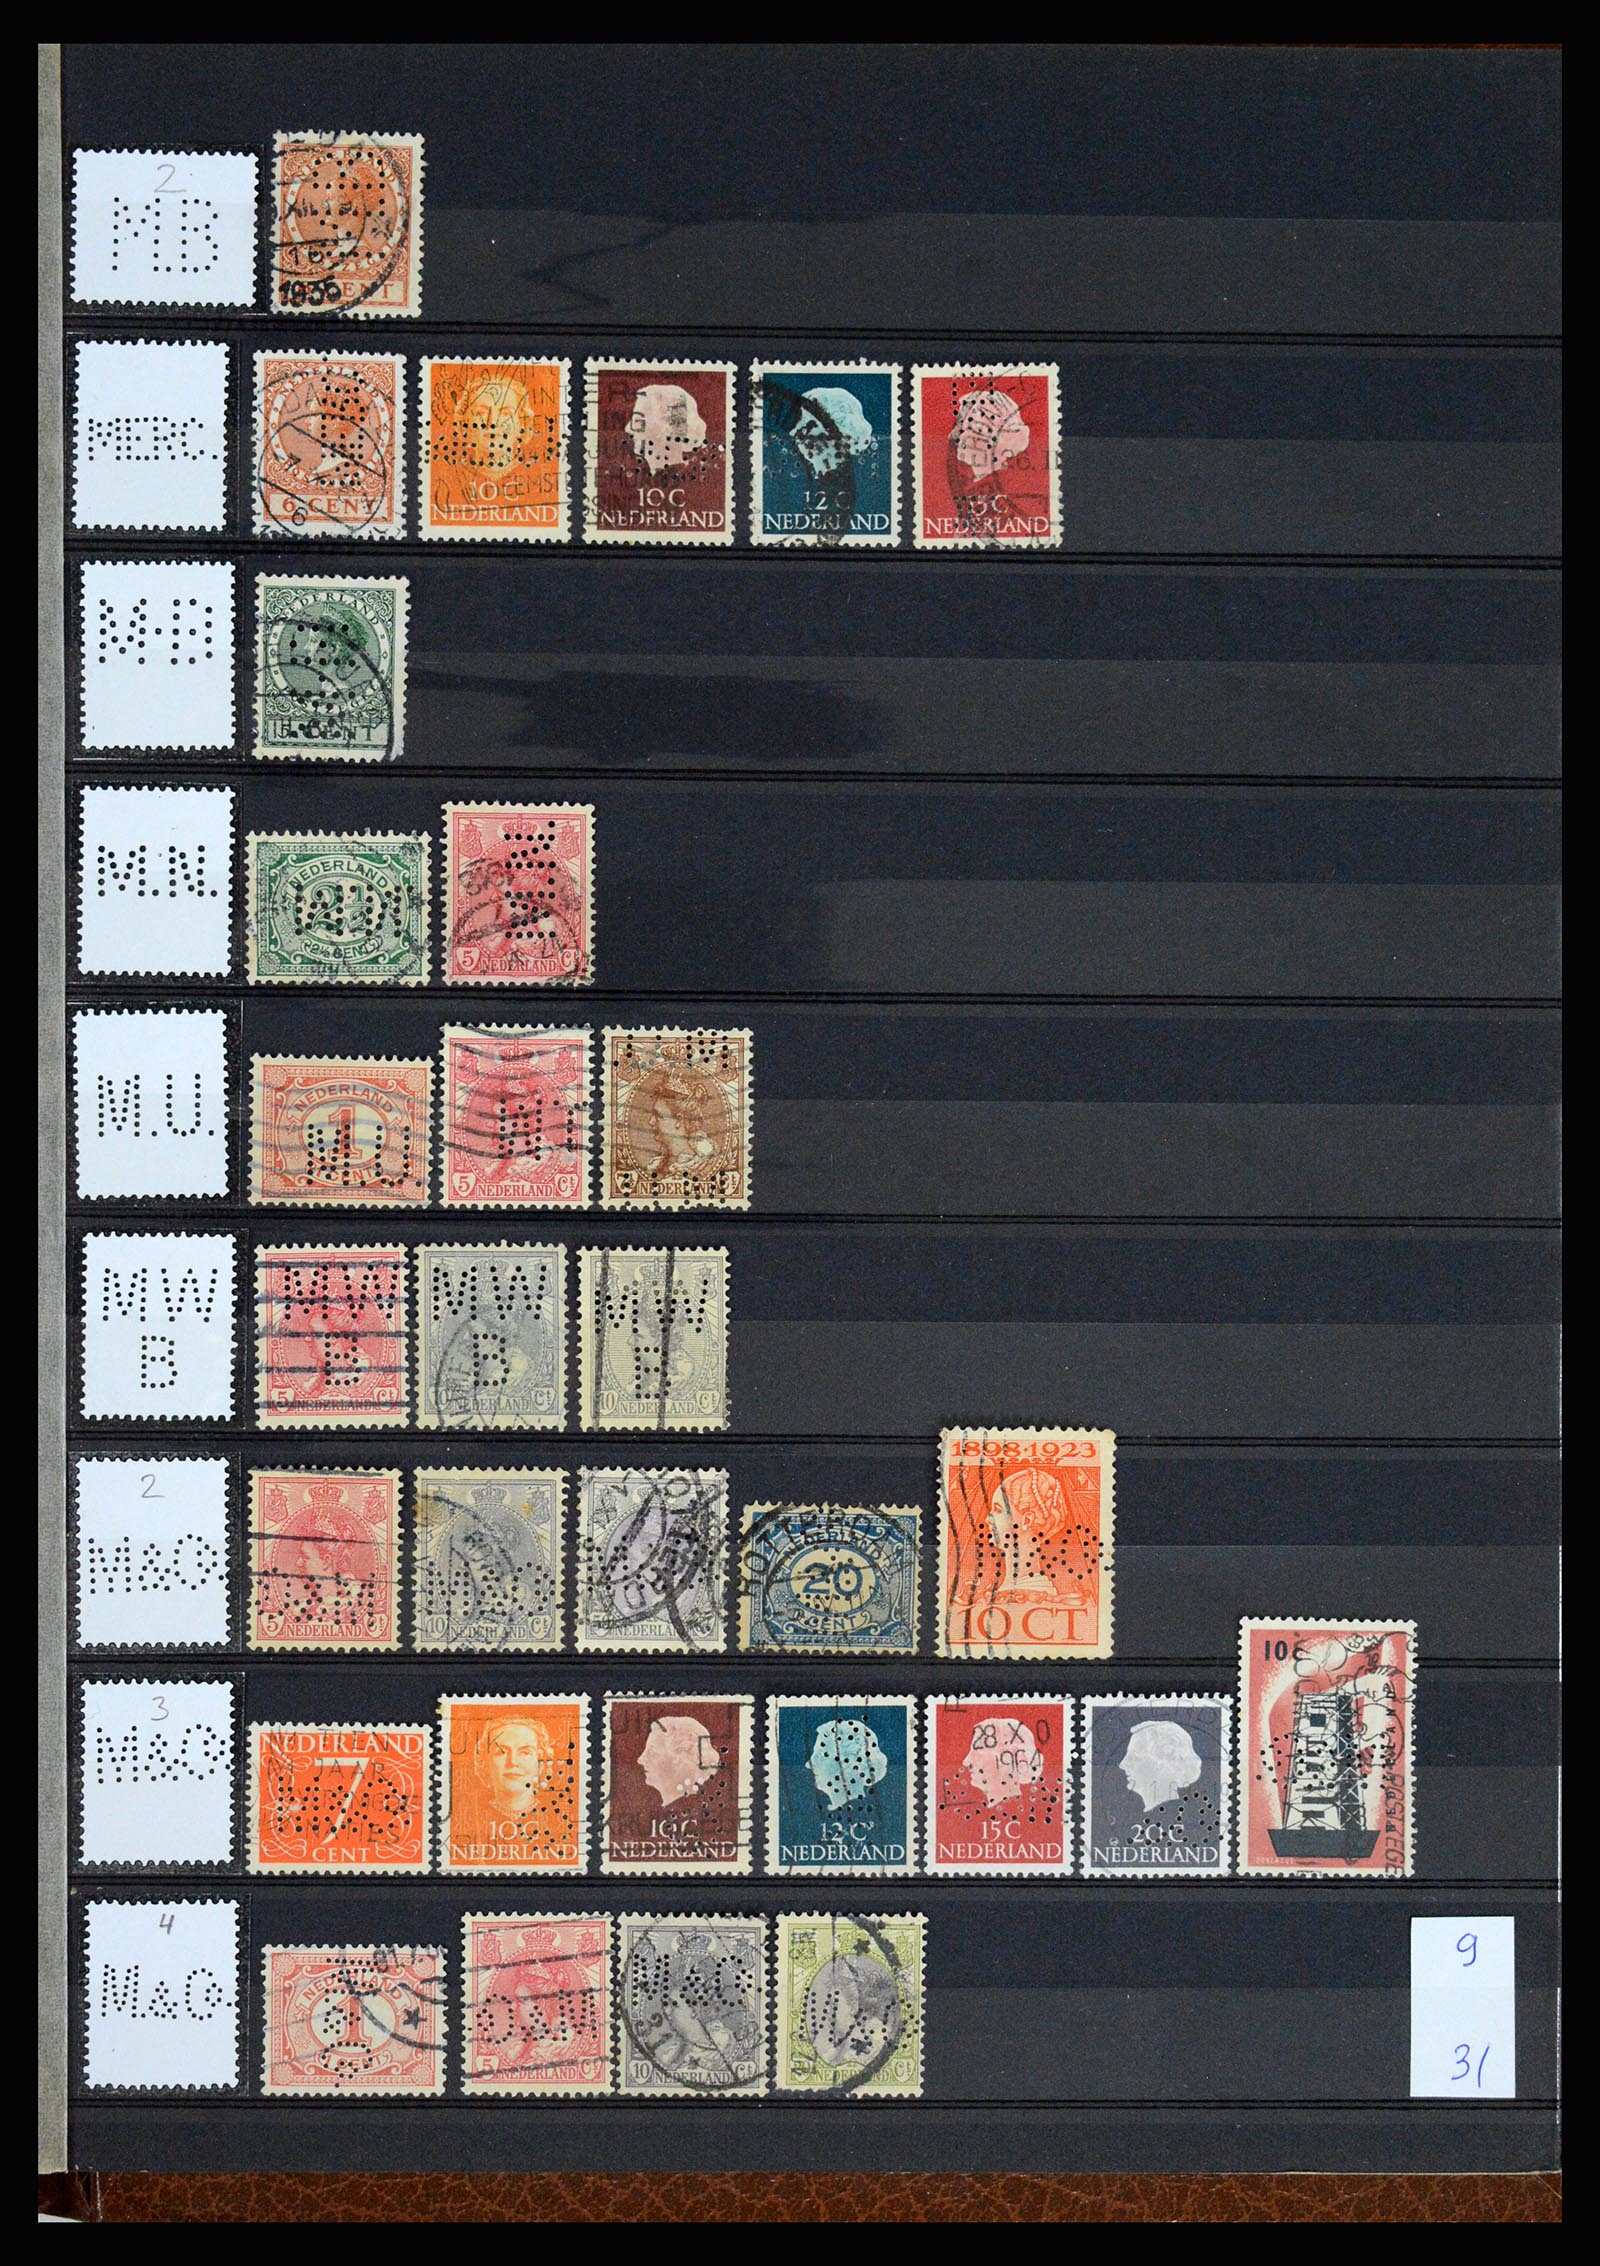 37183 032 - Stamp collection 37183 Netherlands perfins 1872-1960.